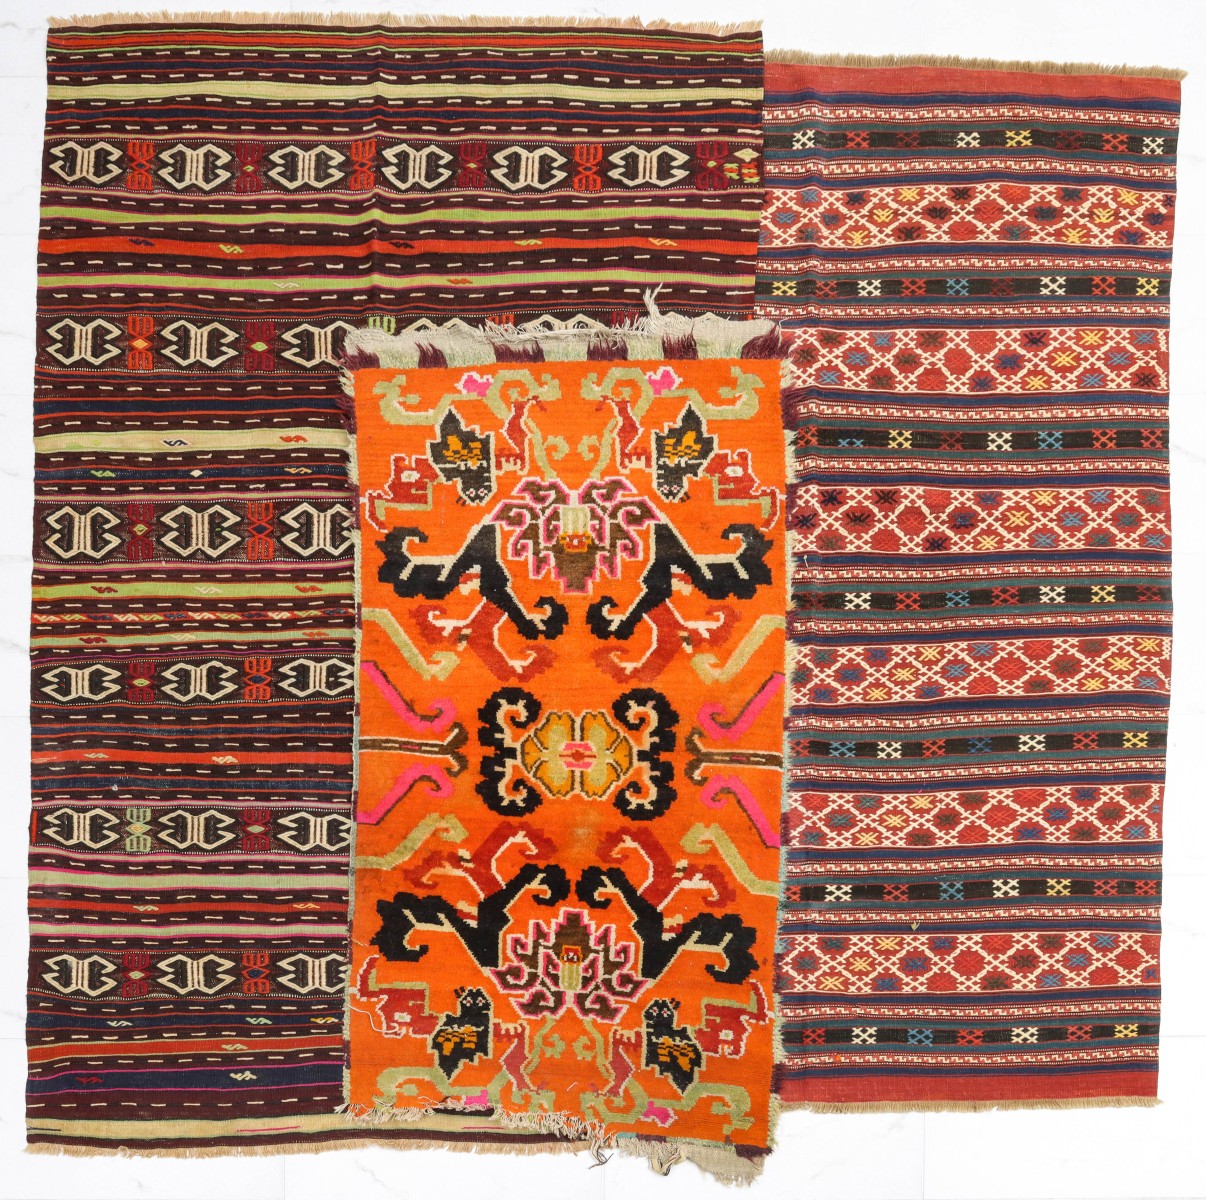 LATE 20TH C. CAUCASIAN AND OTHER WEAVINGS